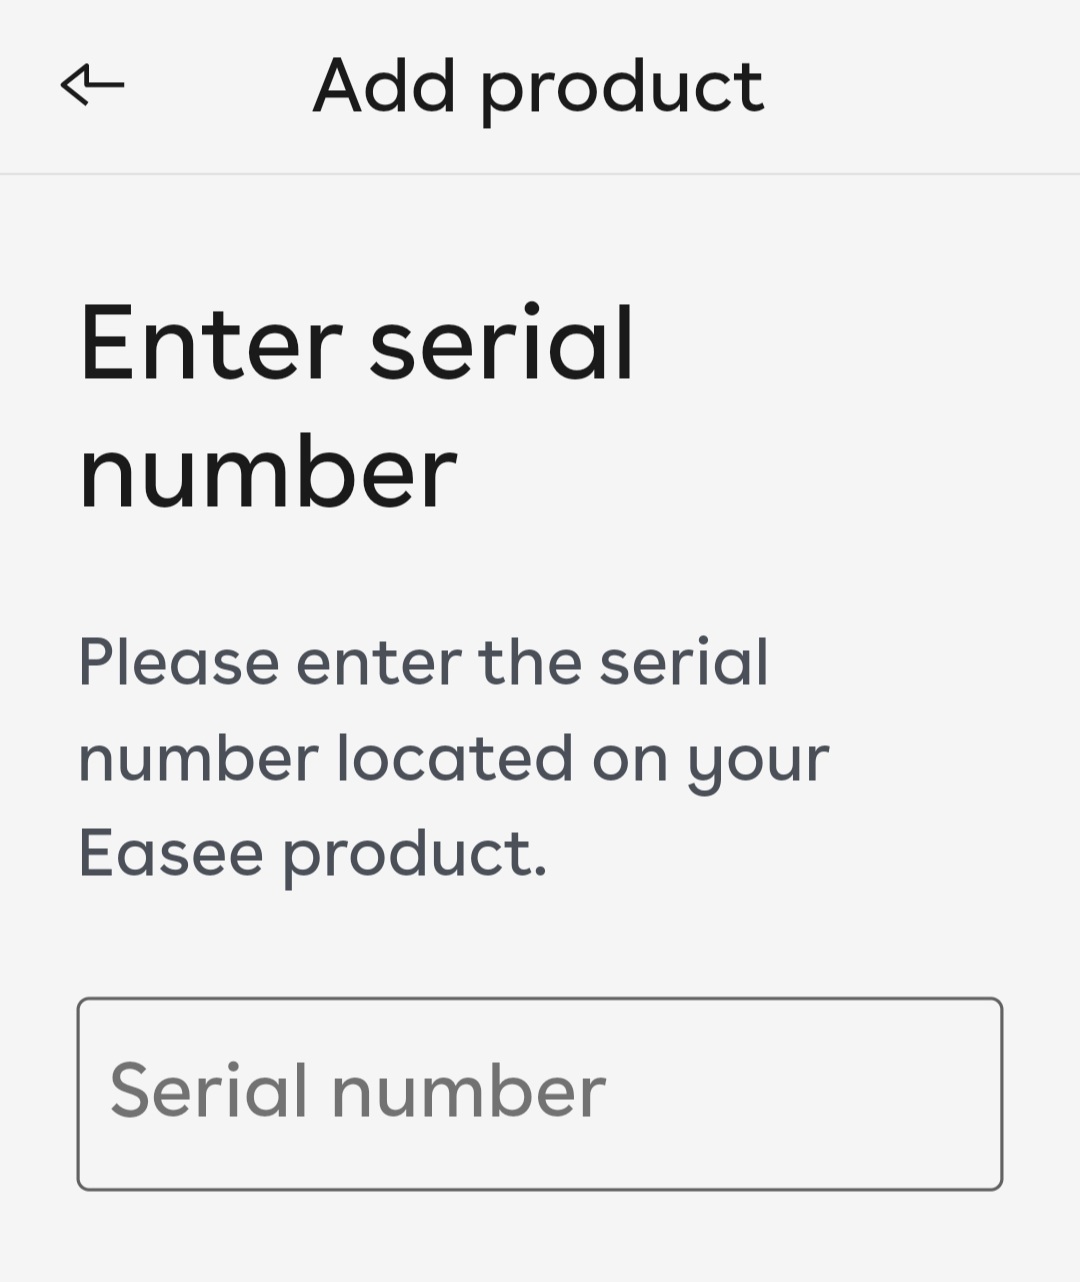 The App showing a blank field for entering the serial number.